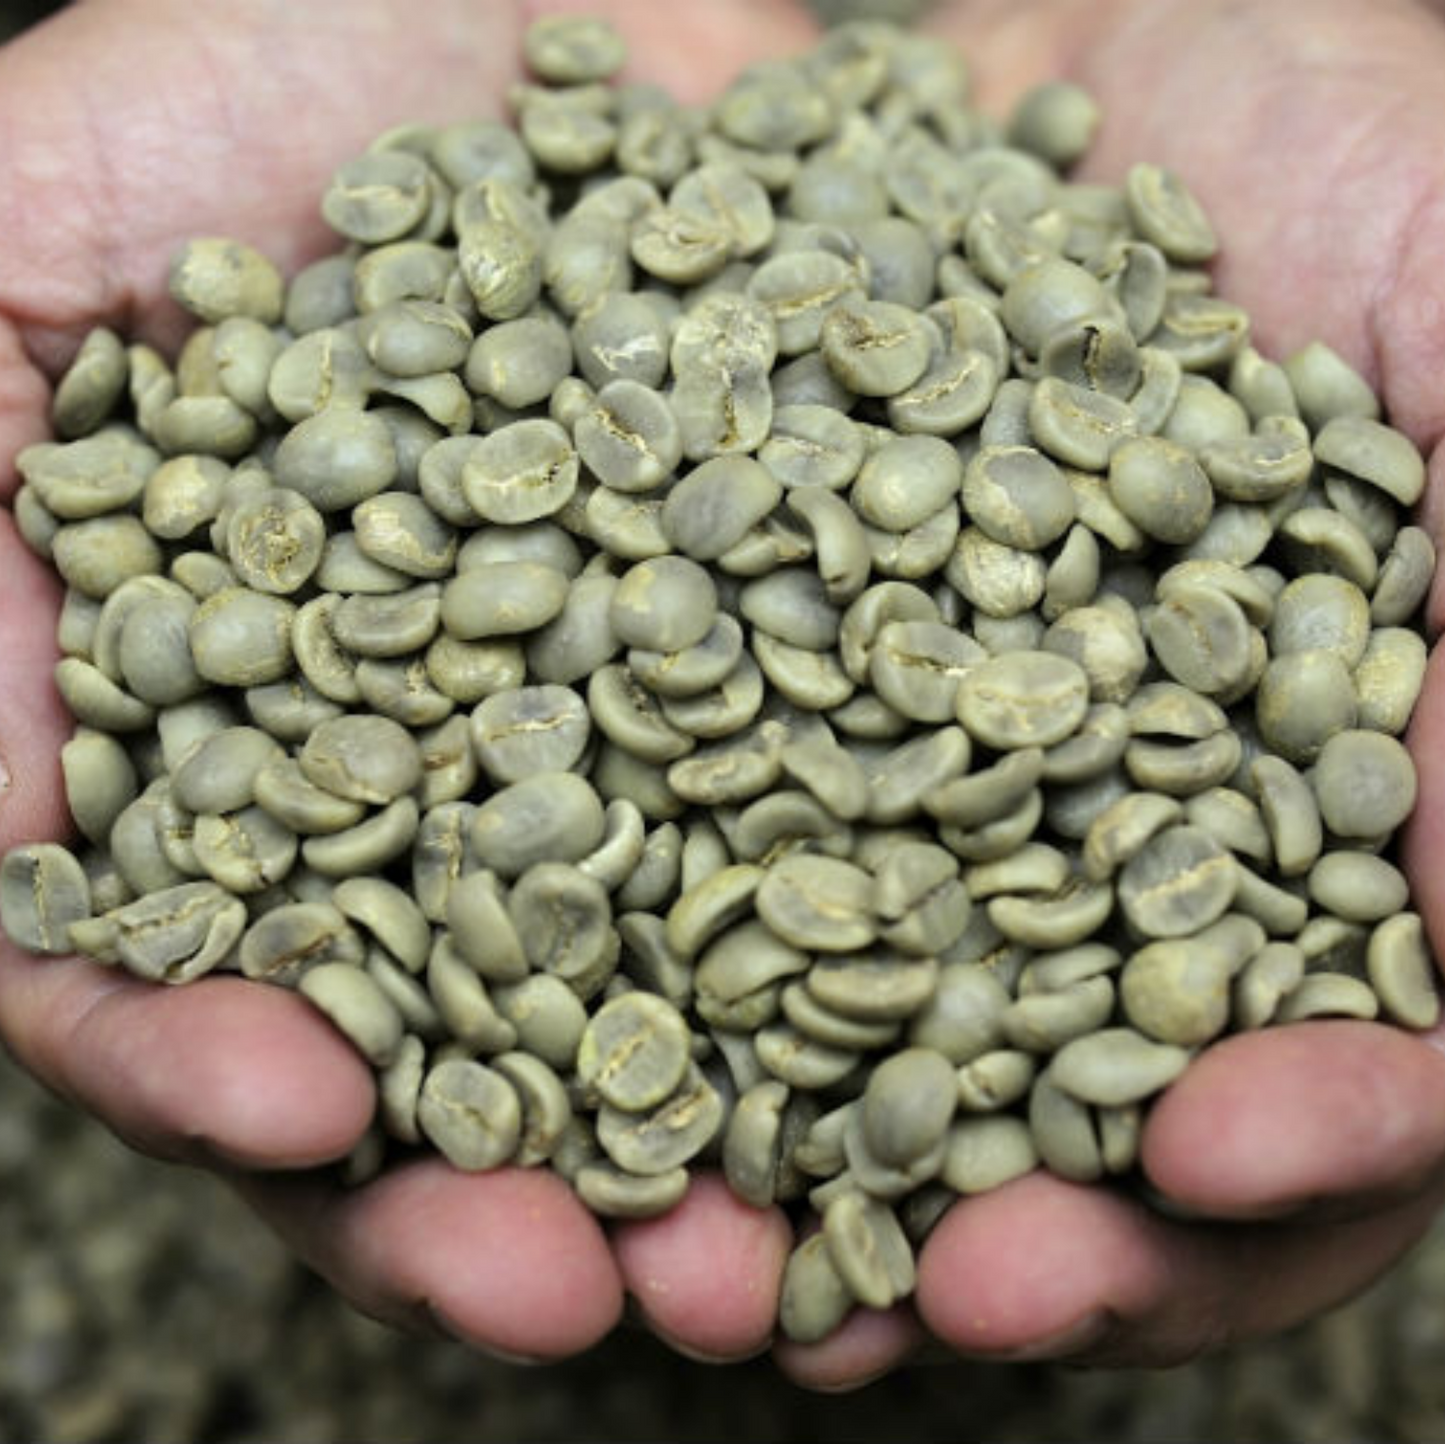 Hand full of green unroasted coffee beans